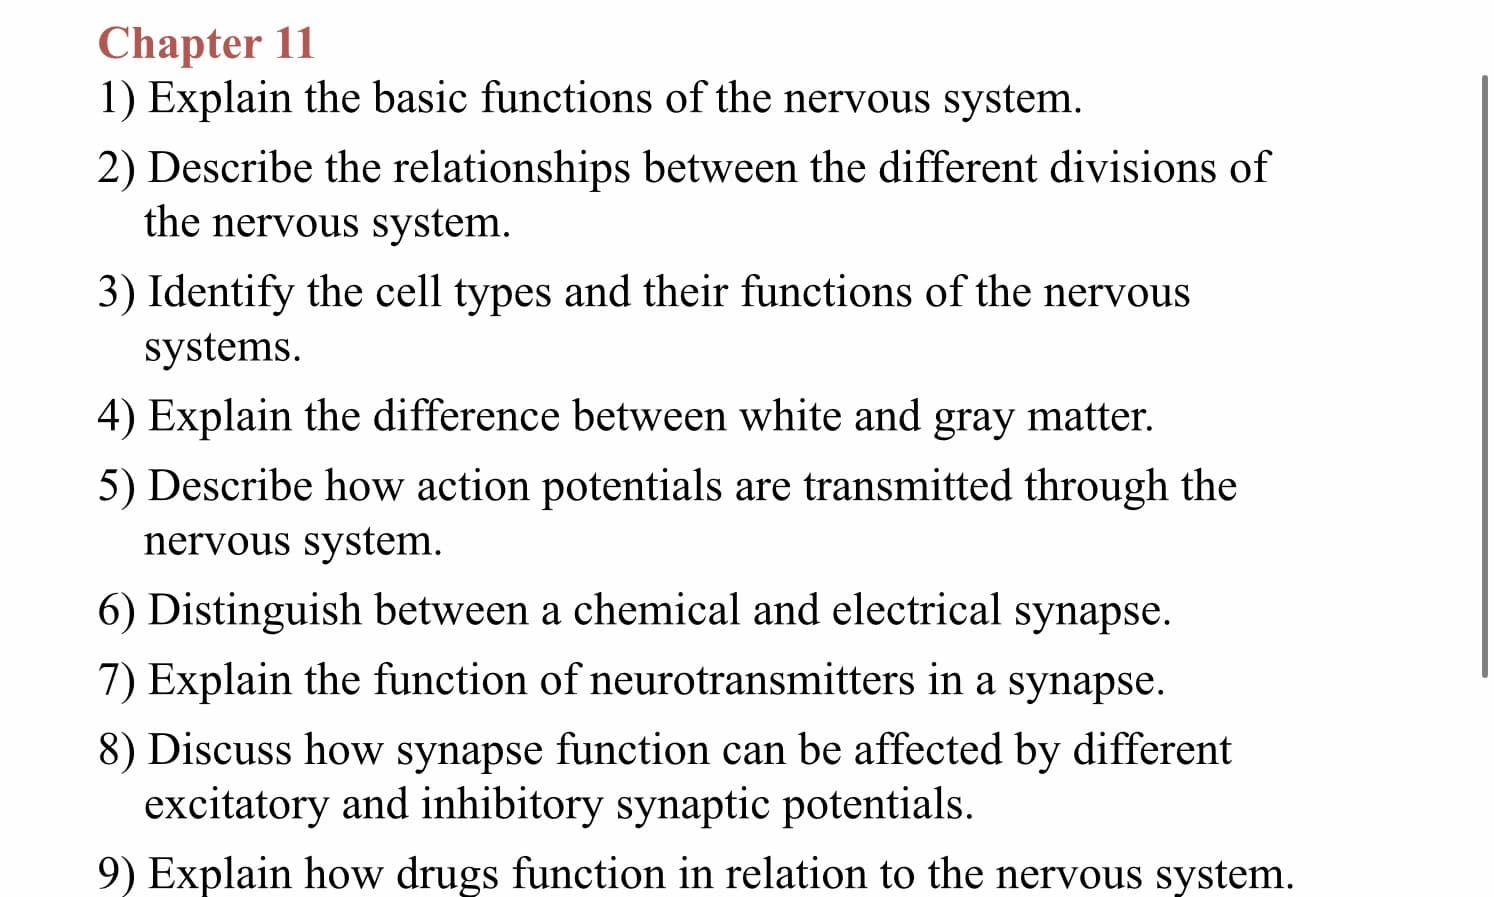 Chapter 11
1) Explain the basic functions of the nervous system
2) Describe the relationships between the different divisions of
the nervous system
3) Identify the cell types and their functions of the nervous
systems
4) Explain the difference between white and gray matter.
5) Describe how action potentials are transmitted through the
nervous system
6) Distinguish between a chemical and electrical synapse
7) Explain the function of neurotransmitters in a synapse
8) Discuss how synapse function can be affected by different
excitatory and inhibitory synaptic potentials.
9) Explain how drugs function in relation to the nervous system
